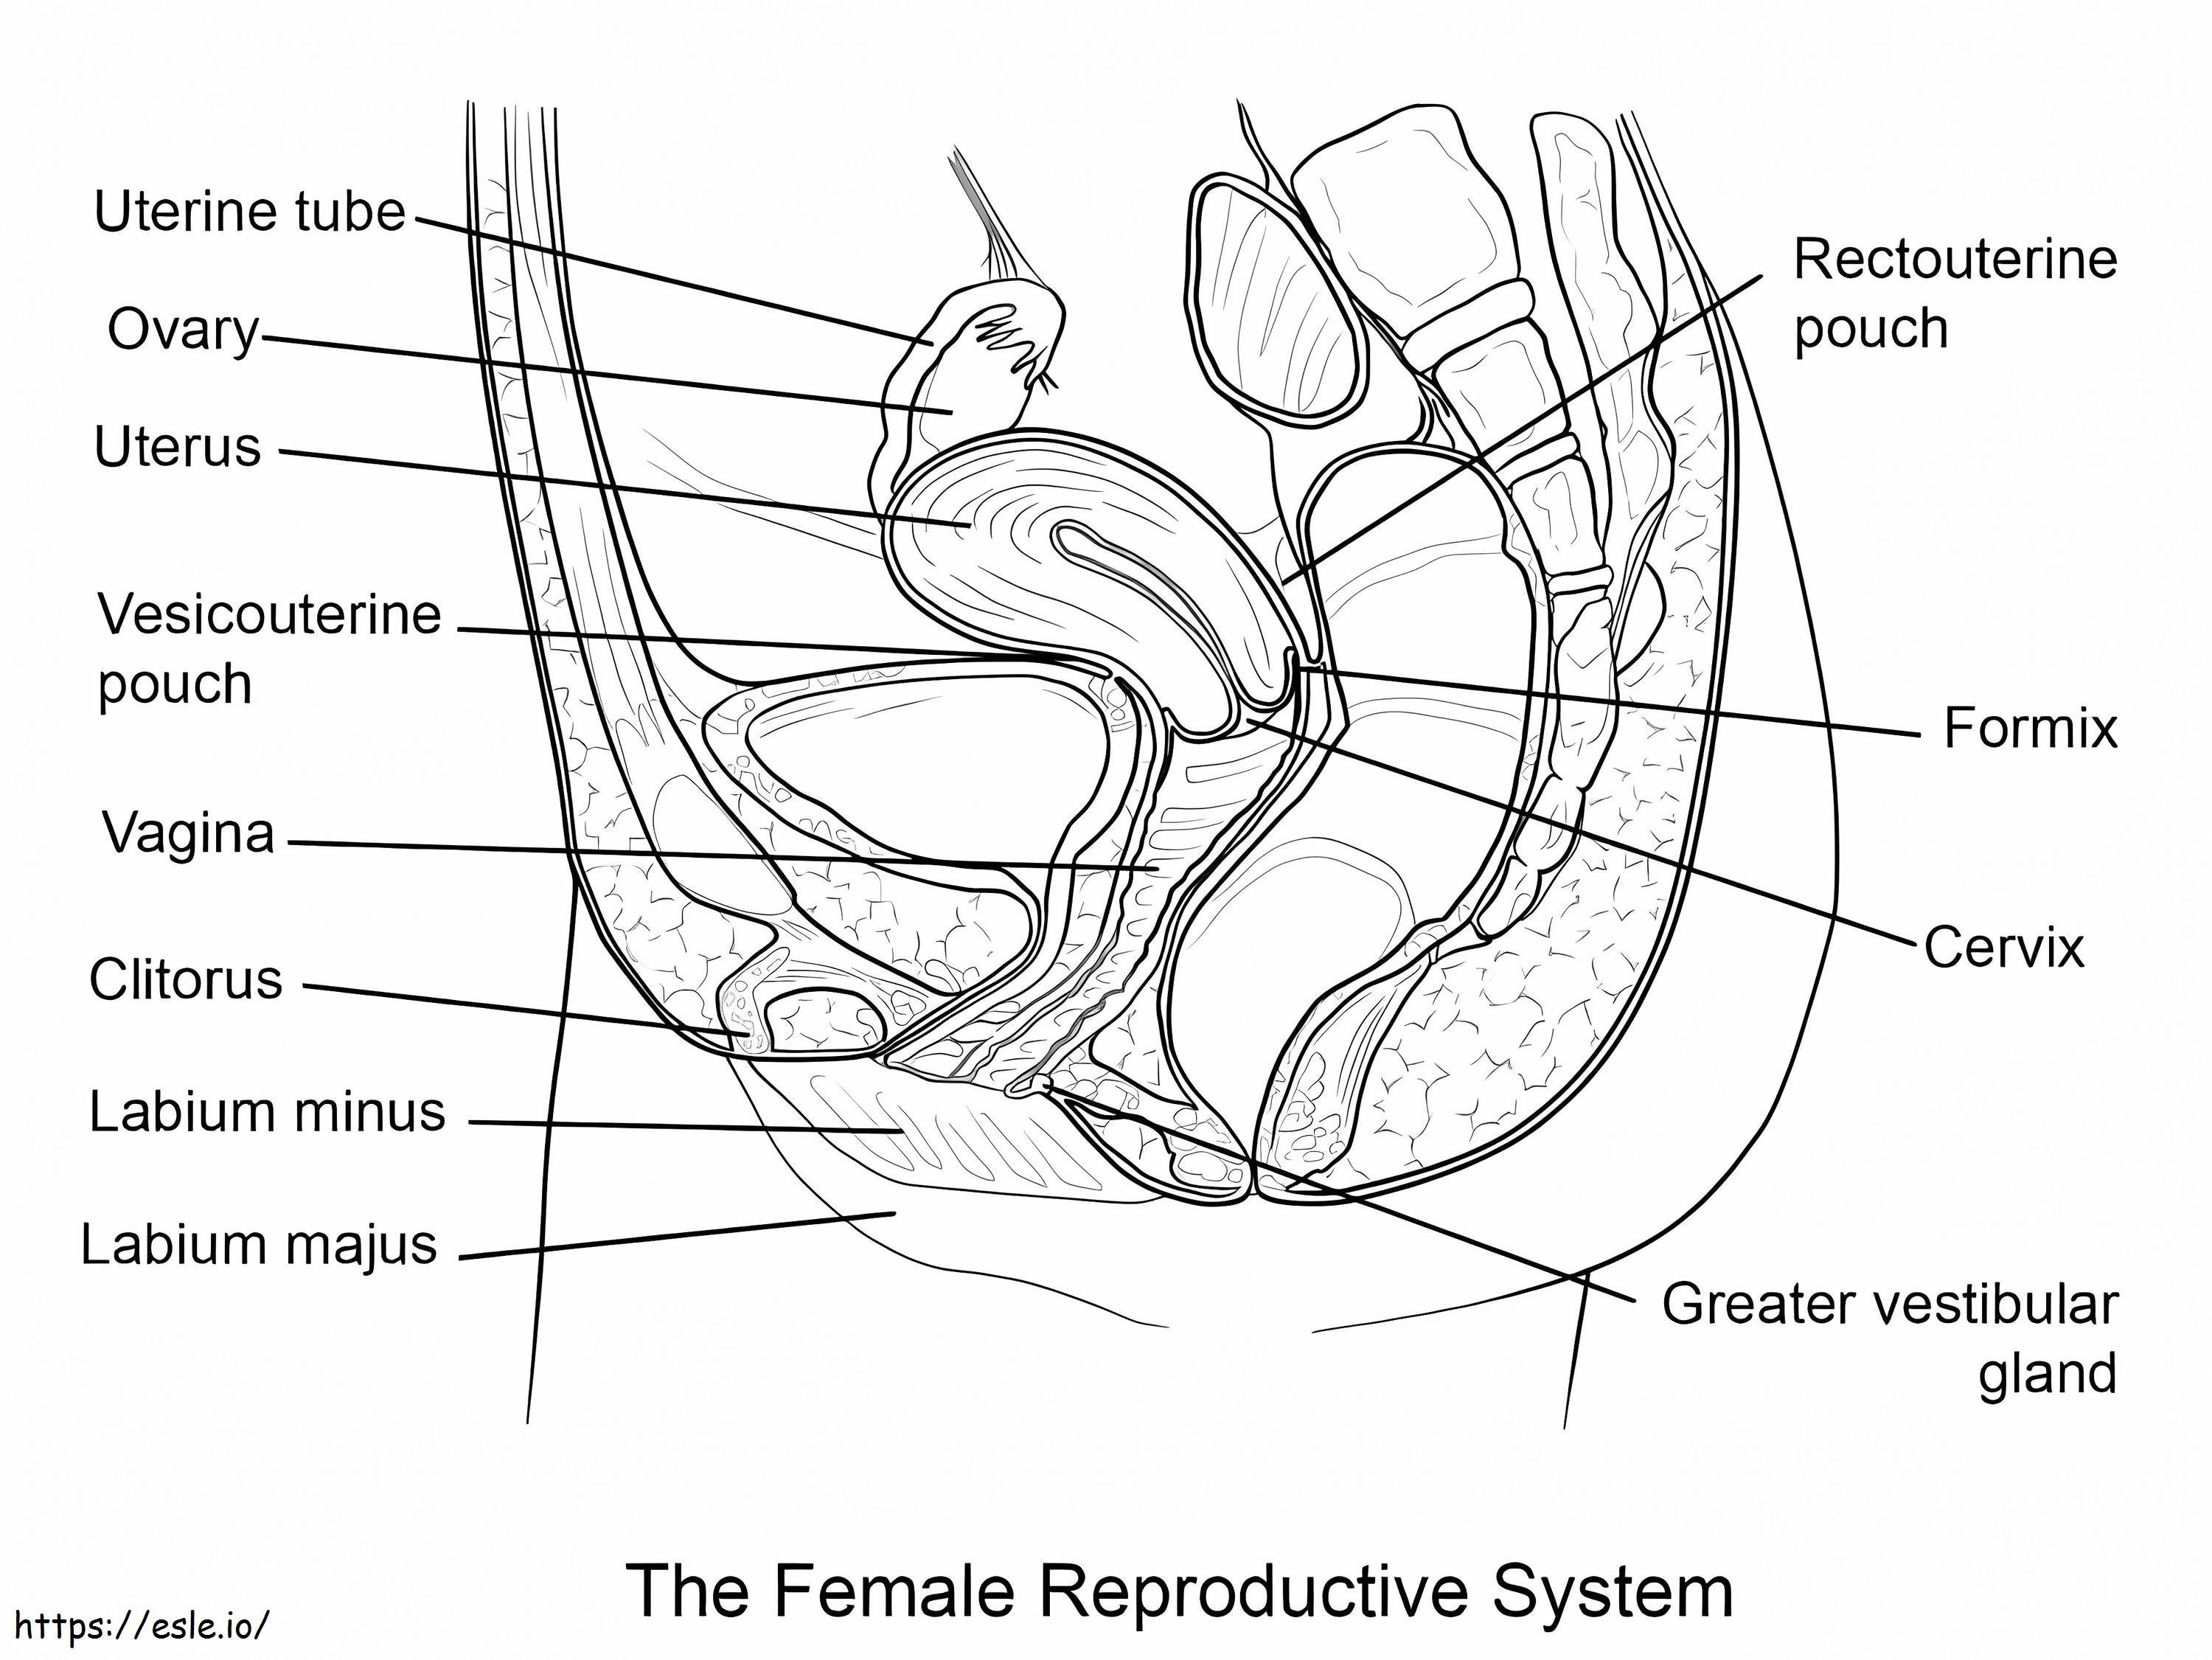 Female Reproductive System coloring page